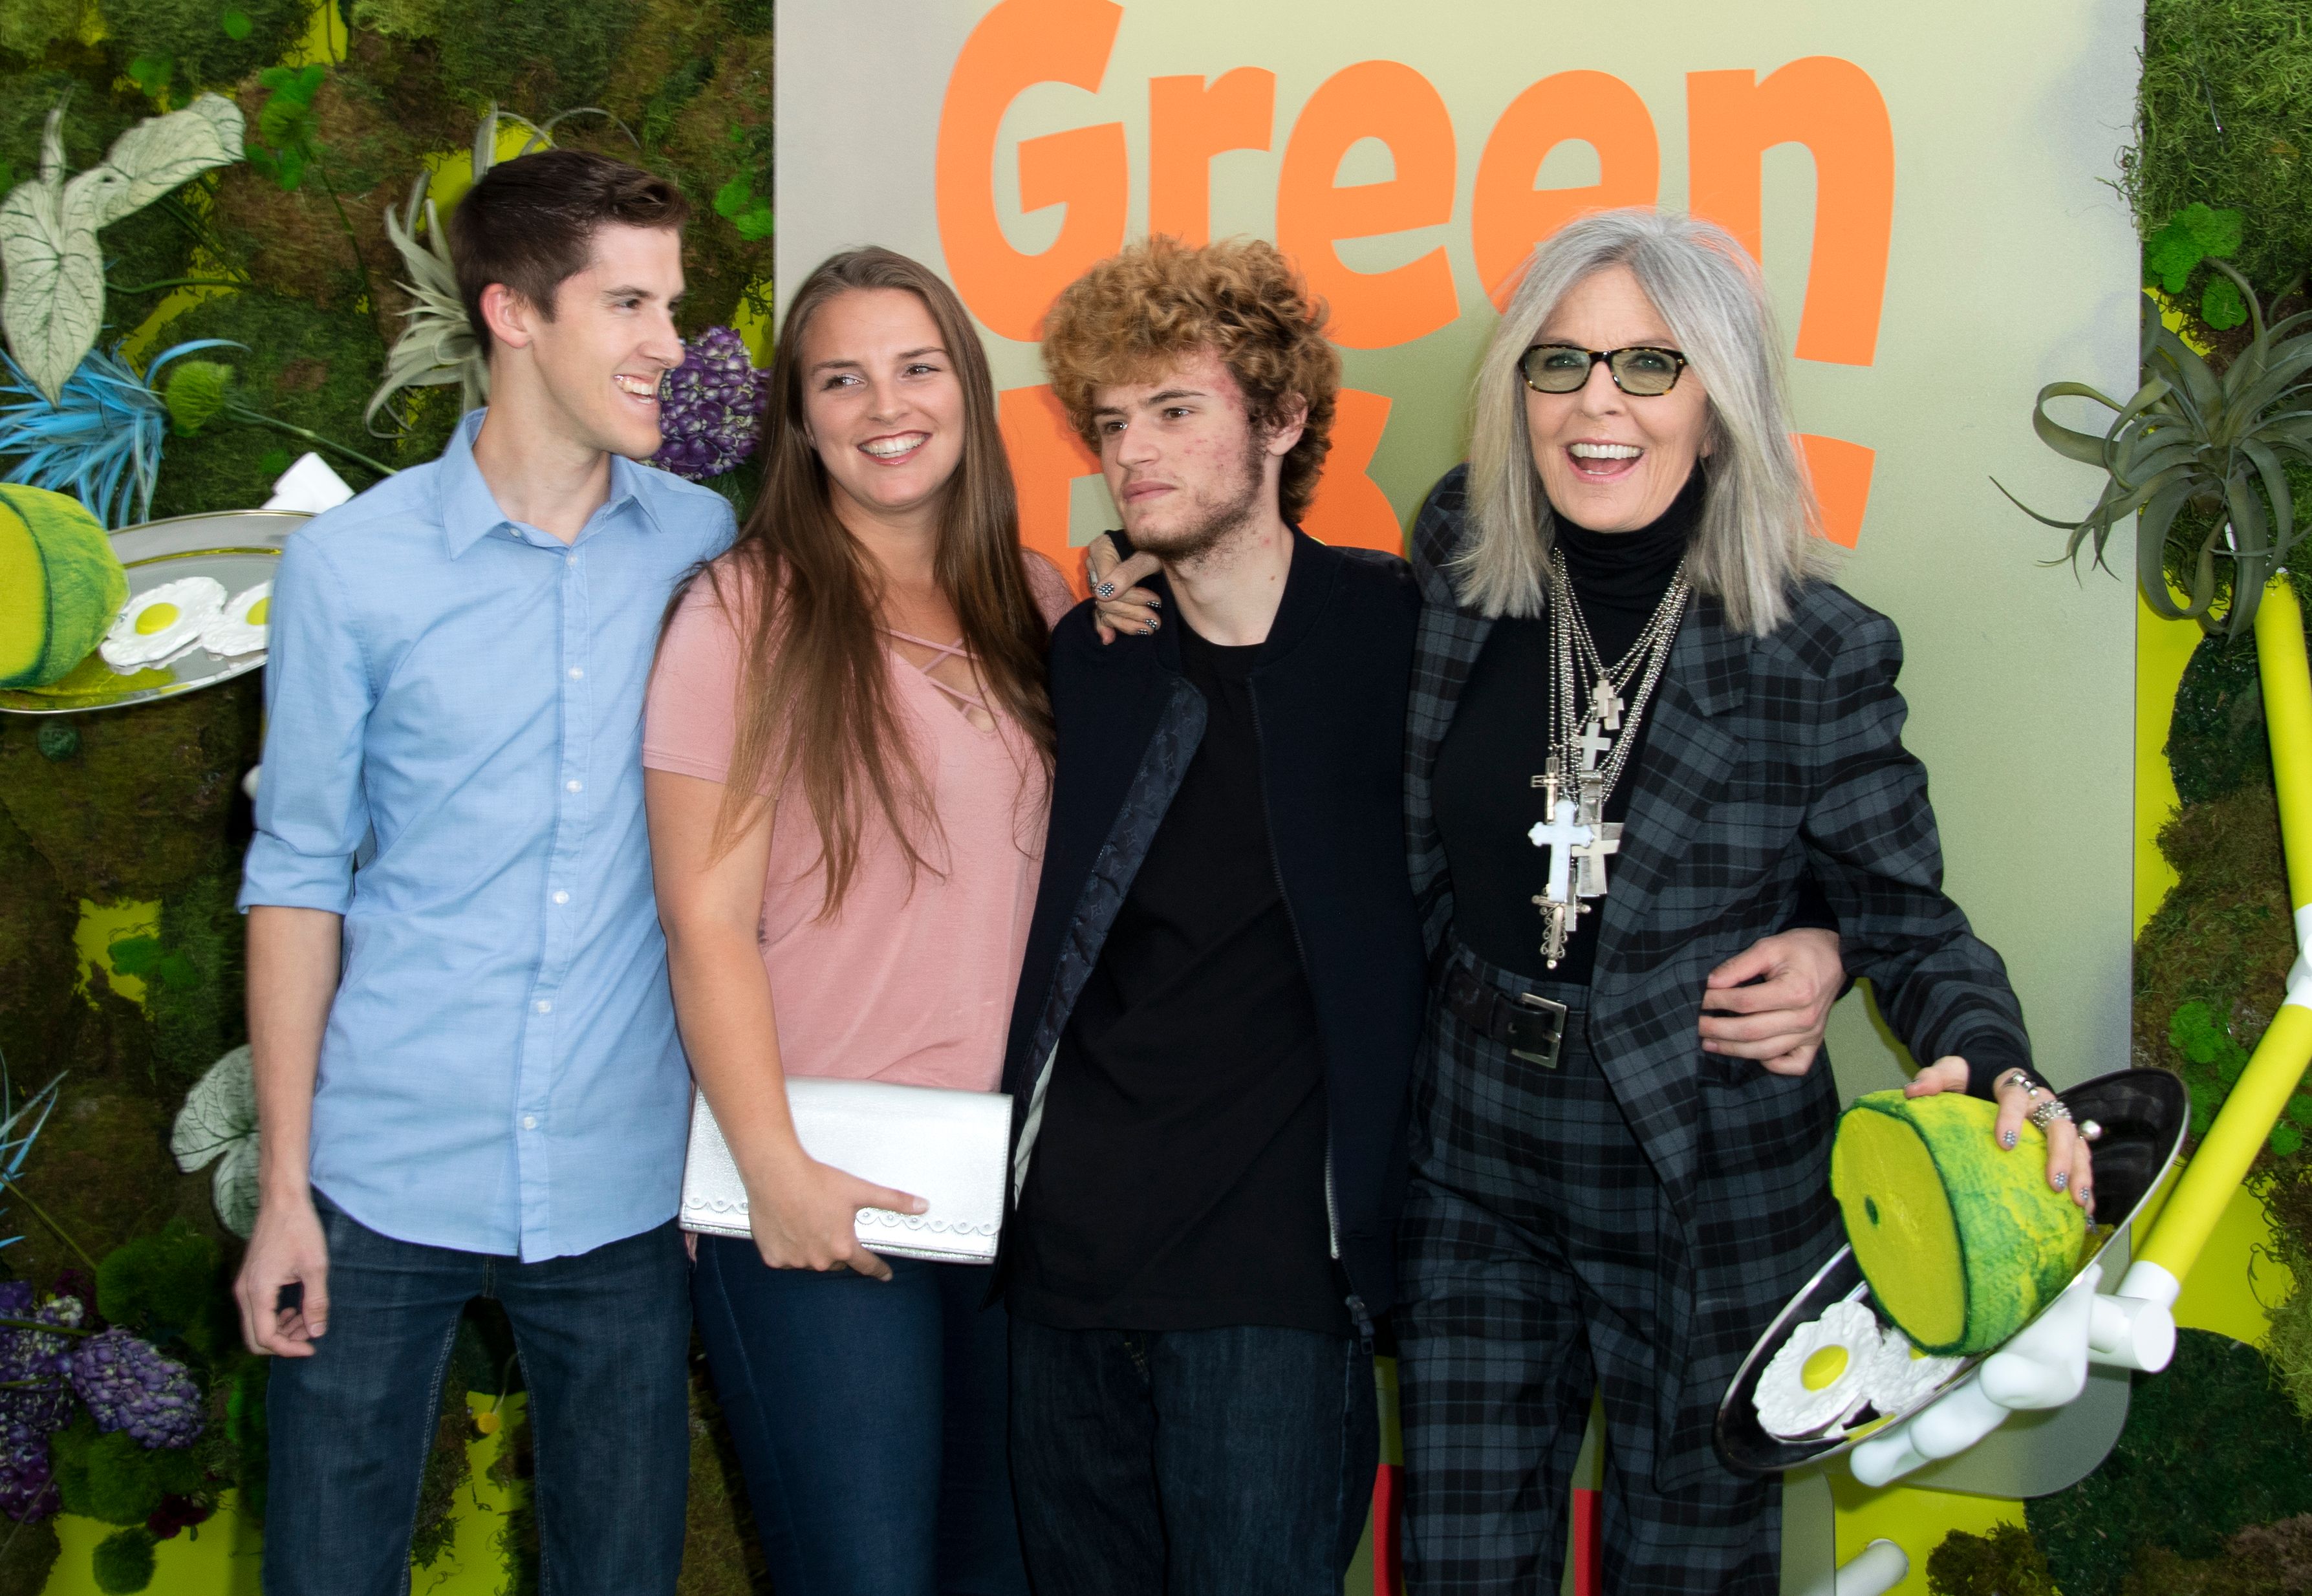 Dexter Keaton, Duke Keaton, and a friend with Diane Keaton at the Netflix premiere of "Green Eggs and Ham" in Hollywood, 2019 | Source: Getty Images